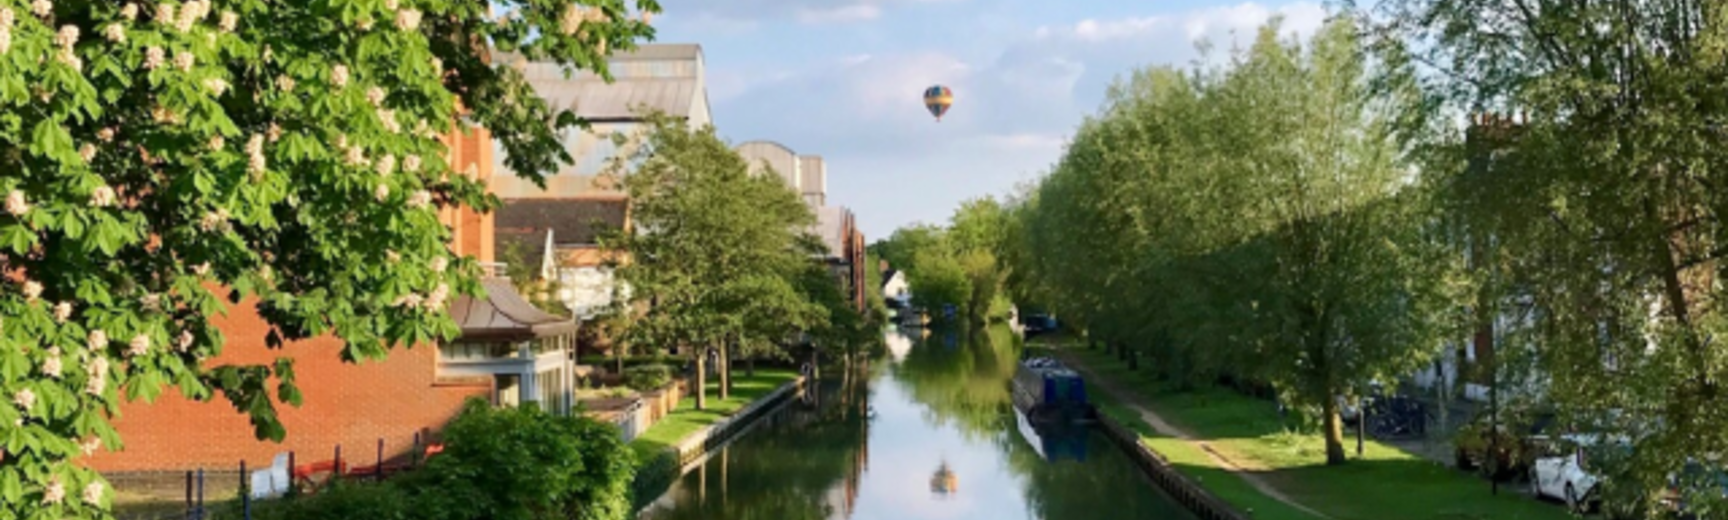 Photo of the Oxford canal with a hot air ballon in the sky above